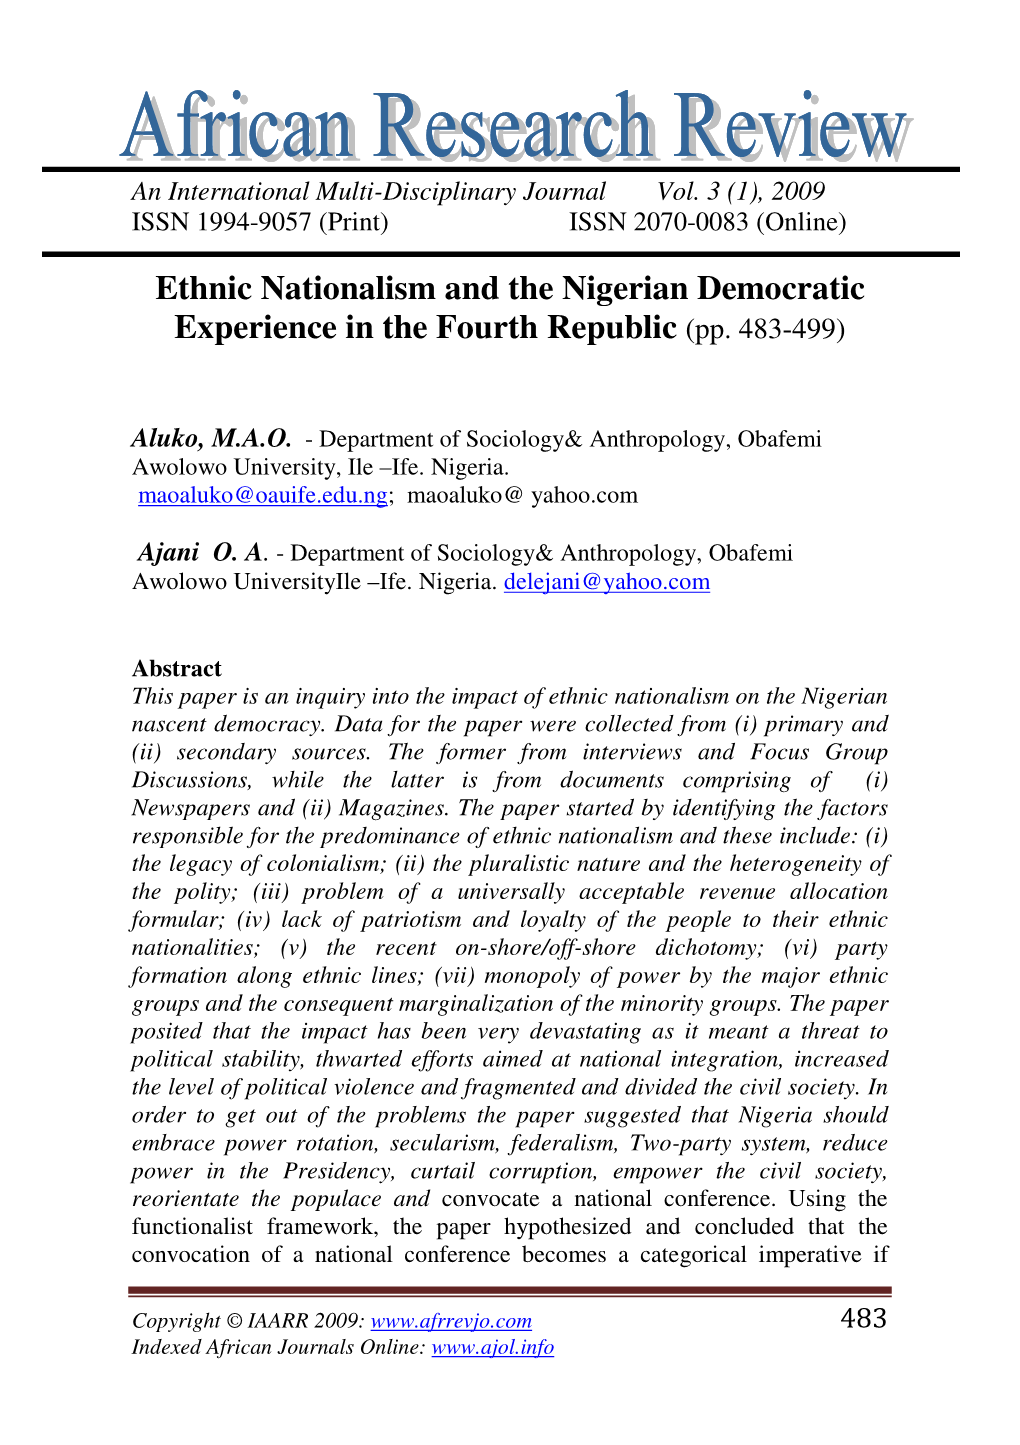 Ethnic Nationalism and the Nigerian Democratic Experience in the Fourth Republic (Pp